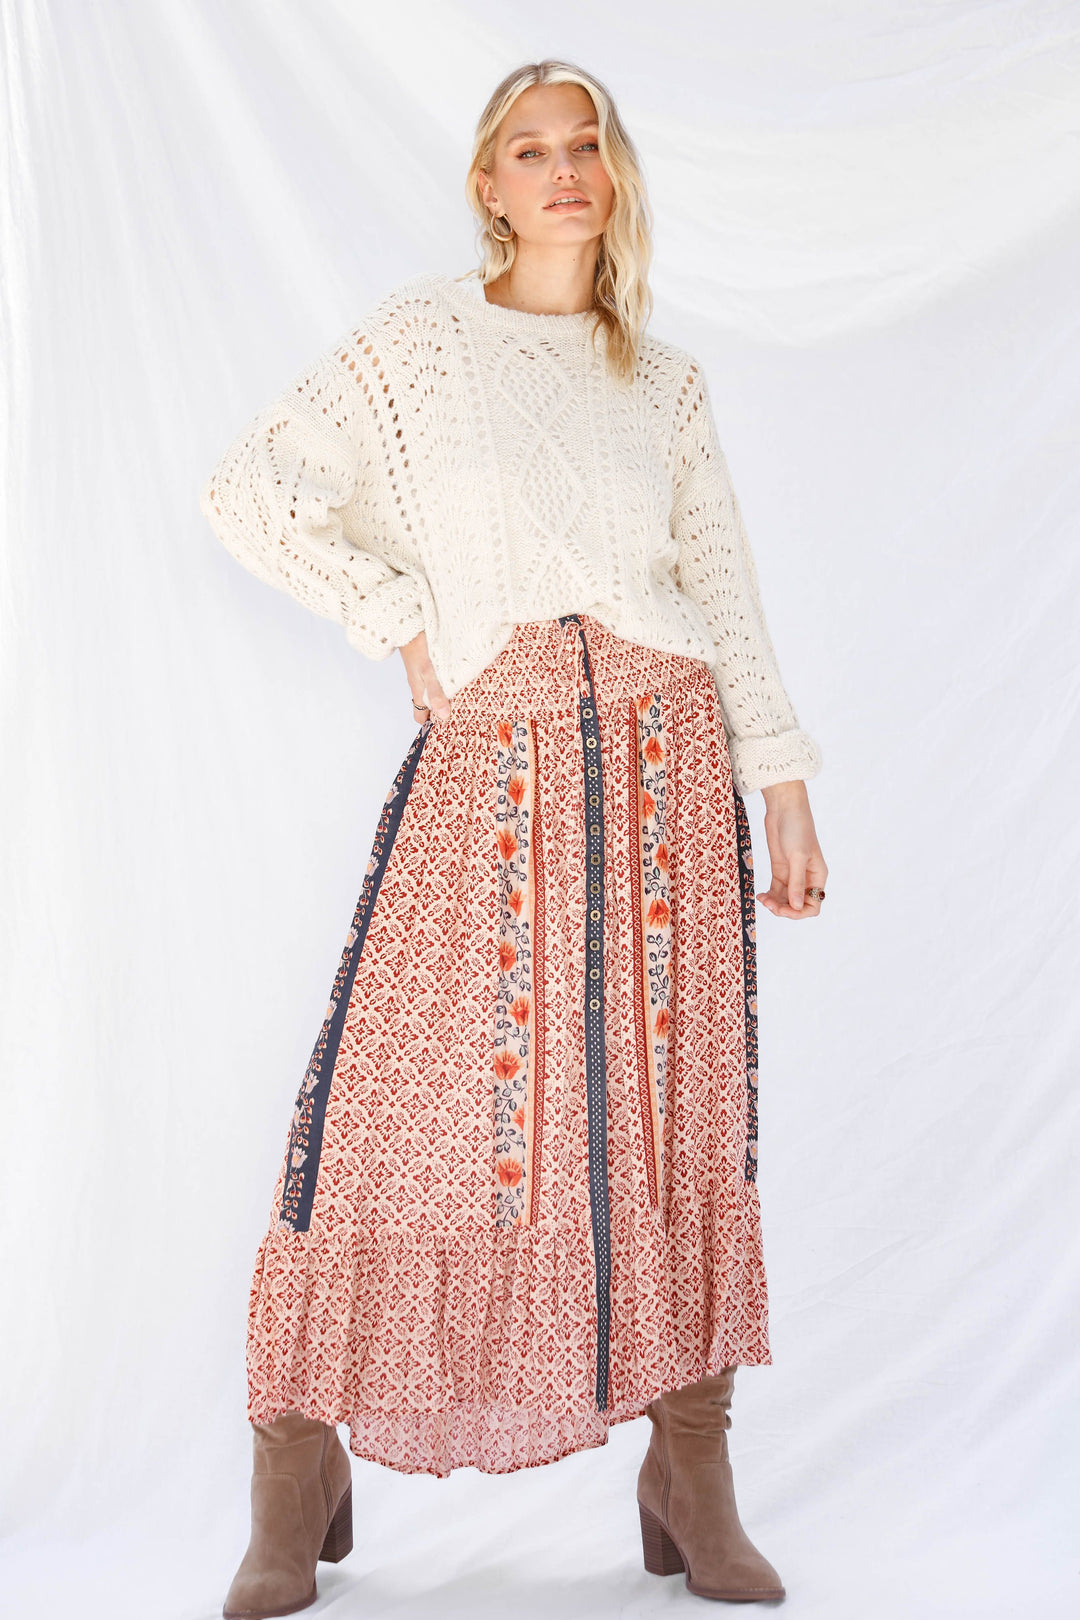 UNION SKIRT - Kingfisher Road - Online Boutique